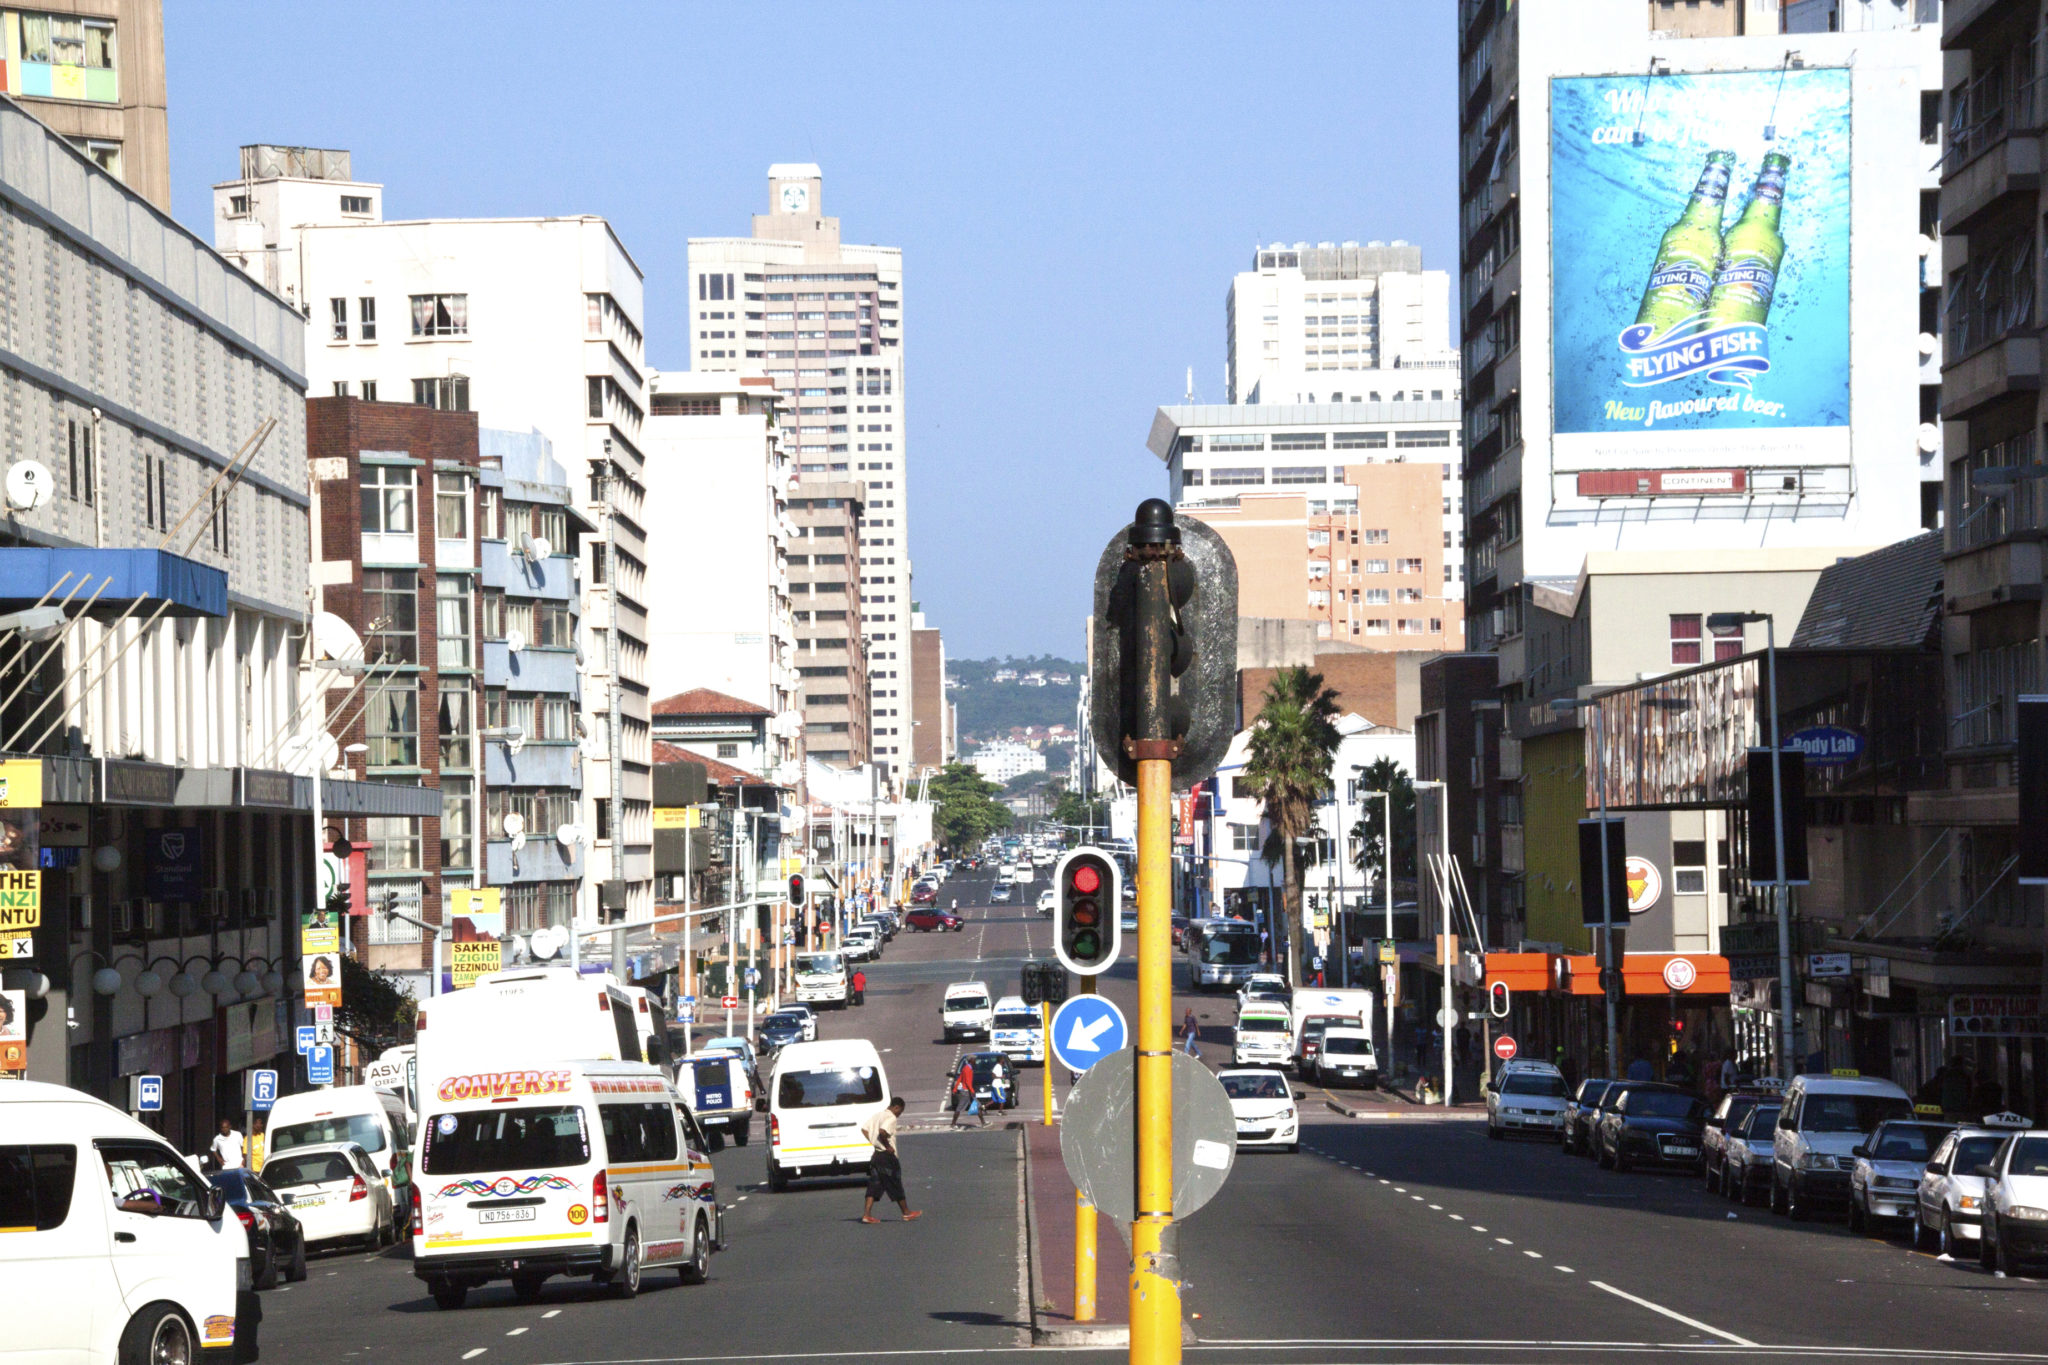 West Street In Durban South Africa On Saturday Morning Emerging